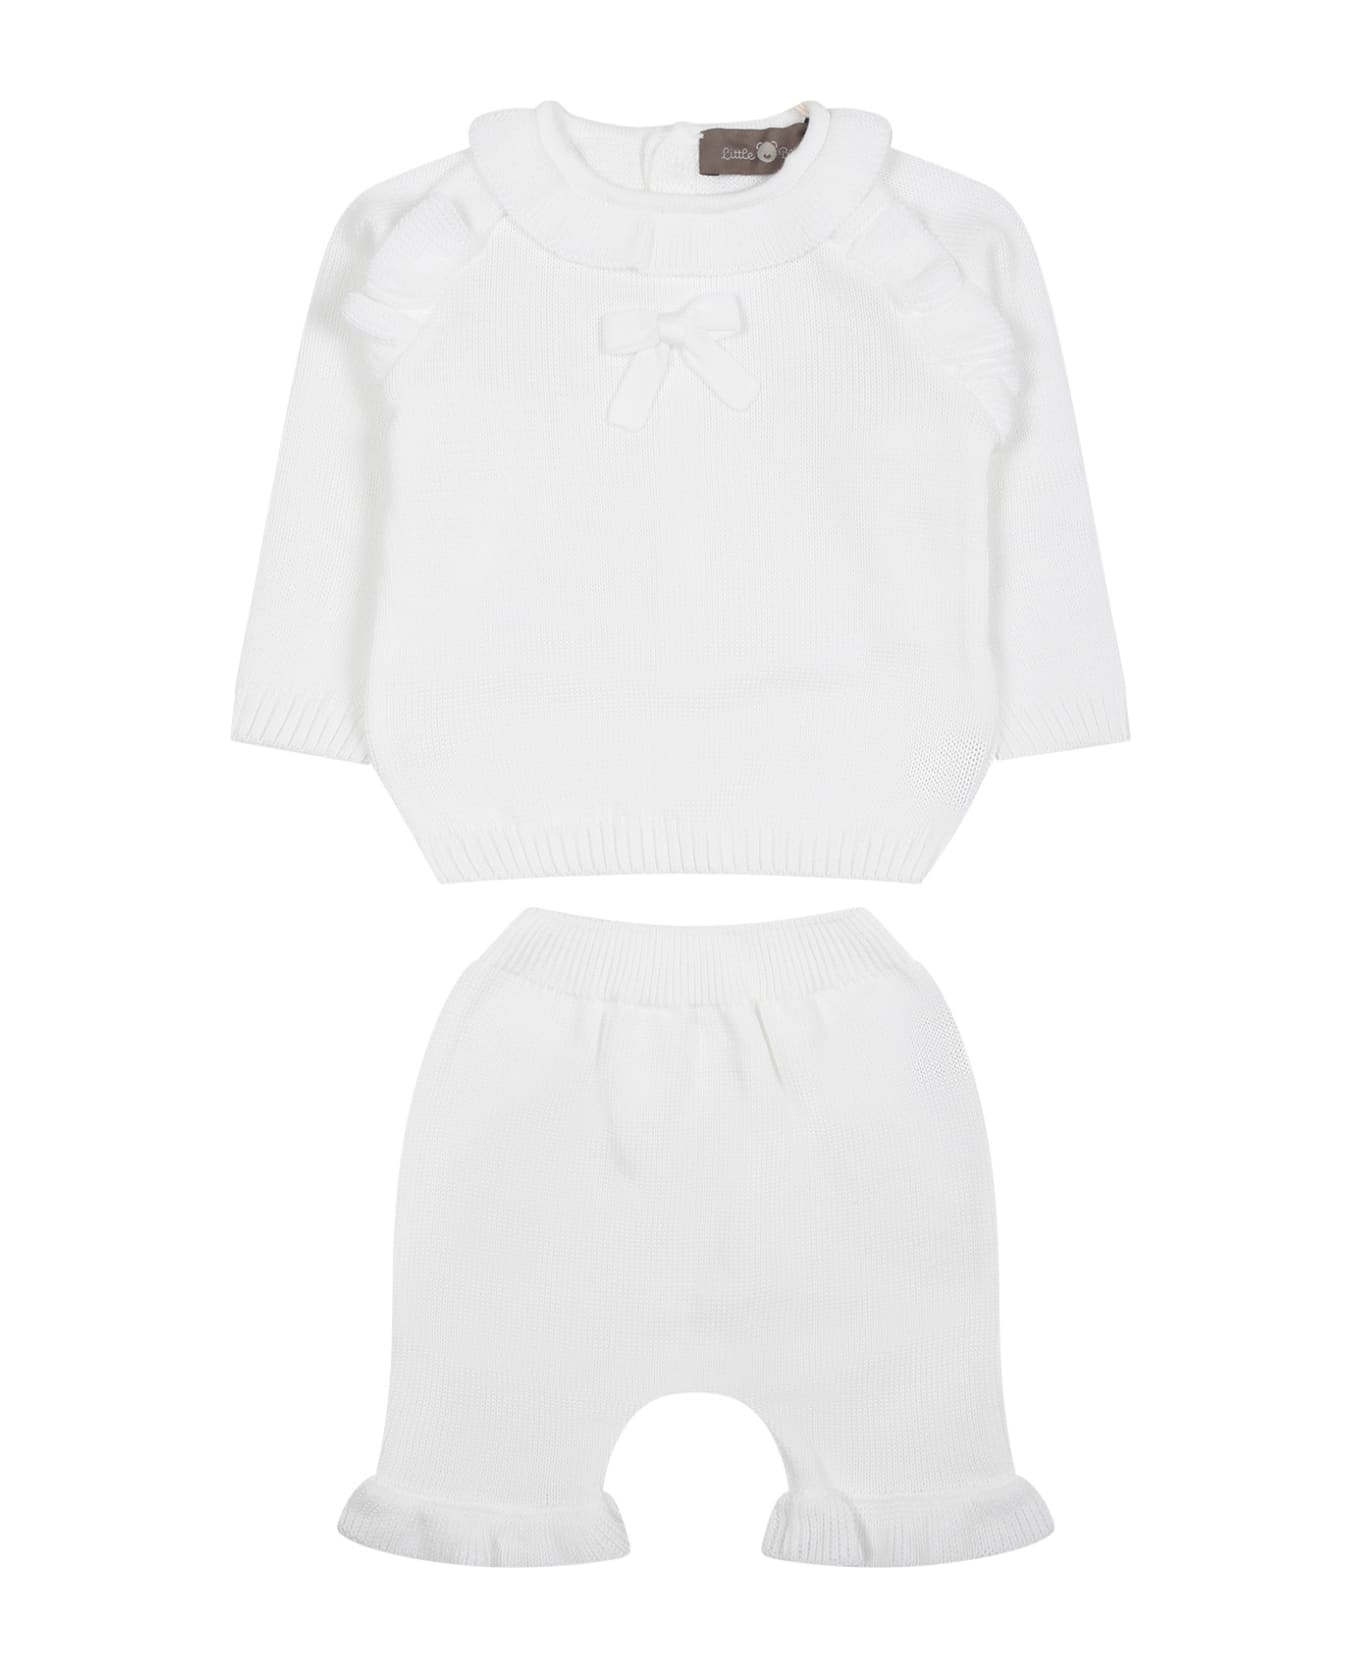 Little Bear White Birth Suit For Baby Girl - Bianco